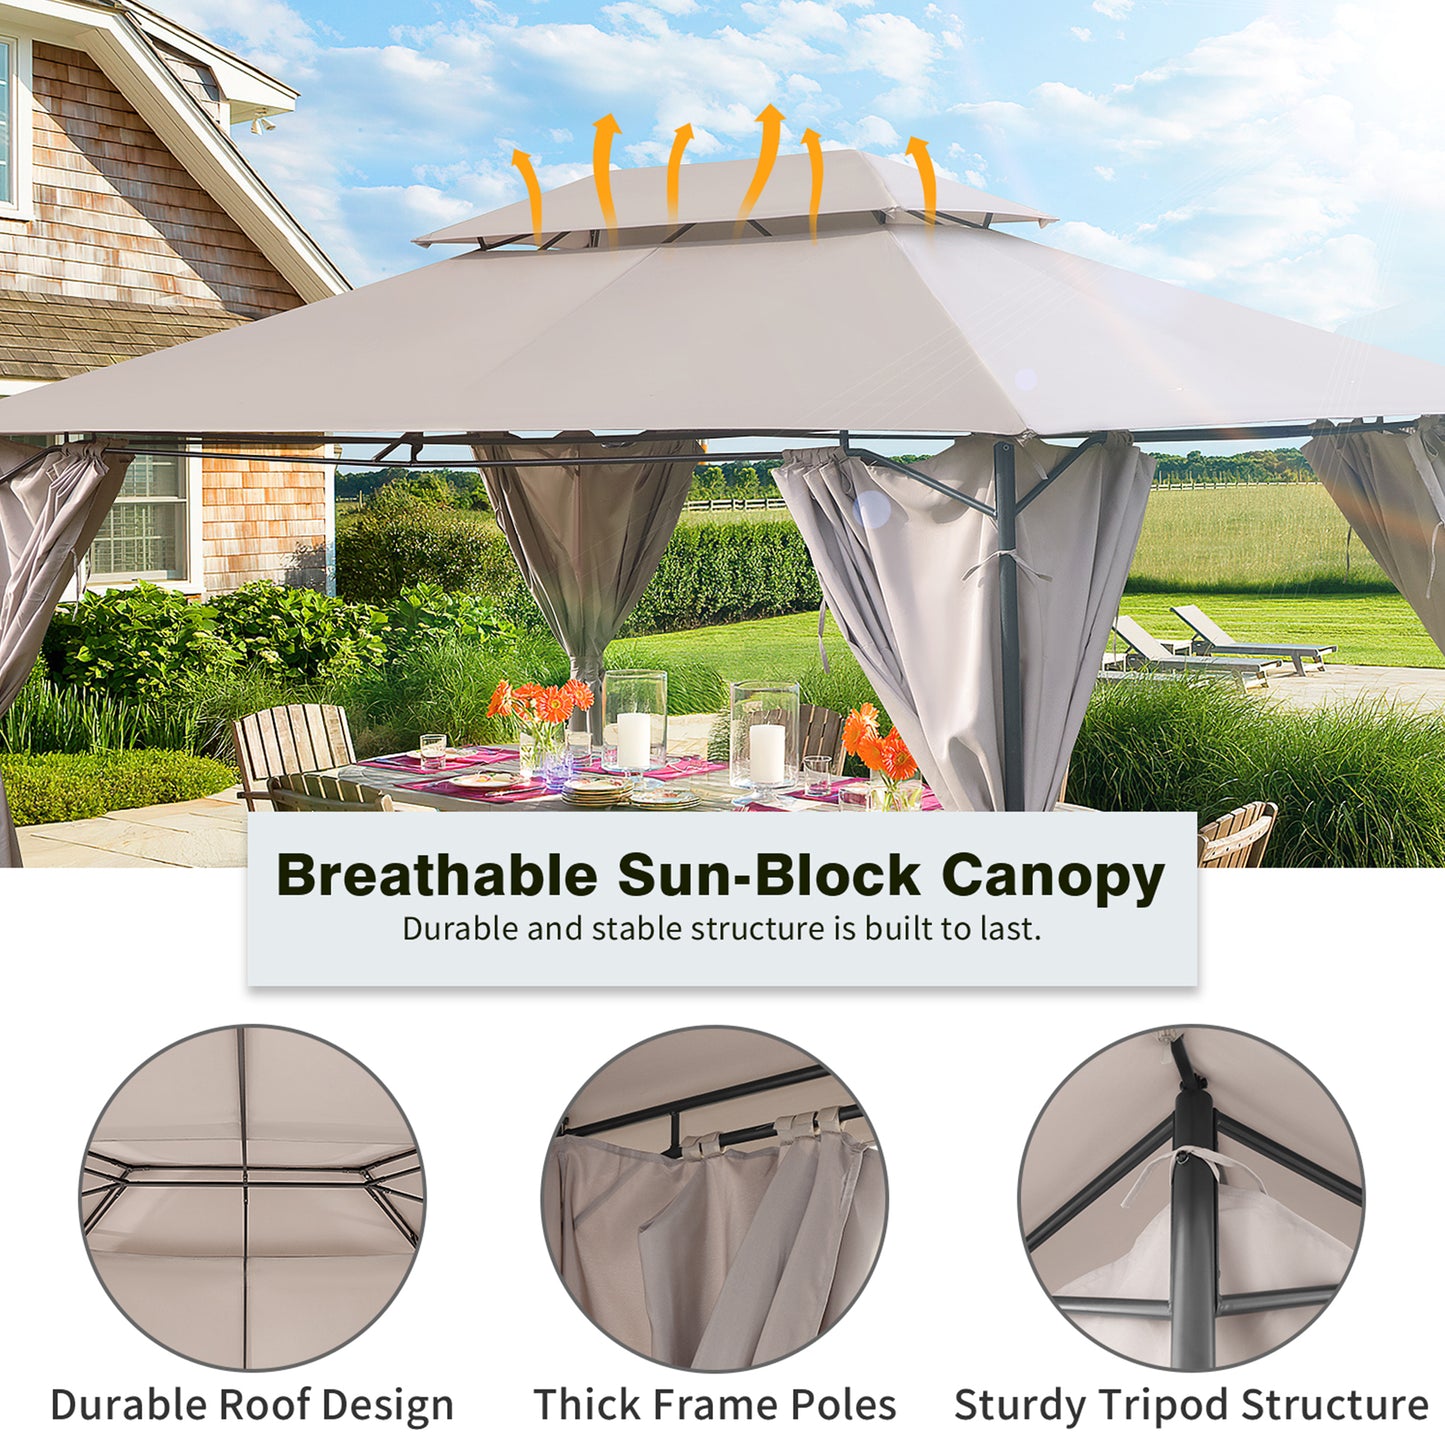 10' x 13' Gazebo for Patios, Double Roof Gazebo with Mosquito Netting for Shade and Rain, Outdoor Canopy Tent for Backyard, Garden, Lawn, Deck, Khaki, Y022